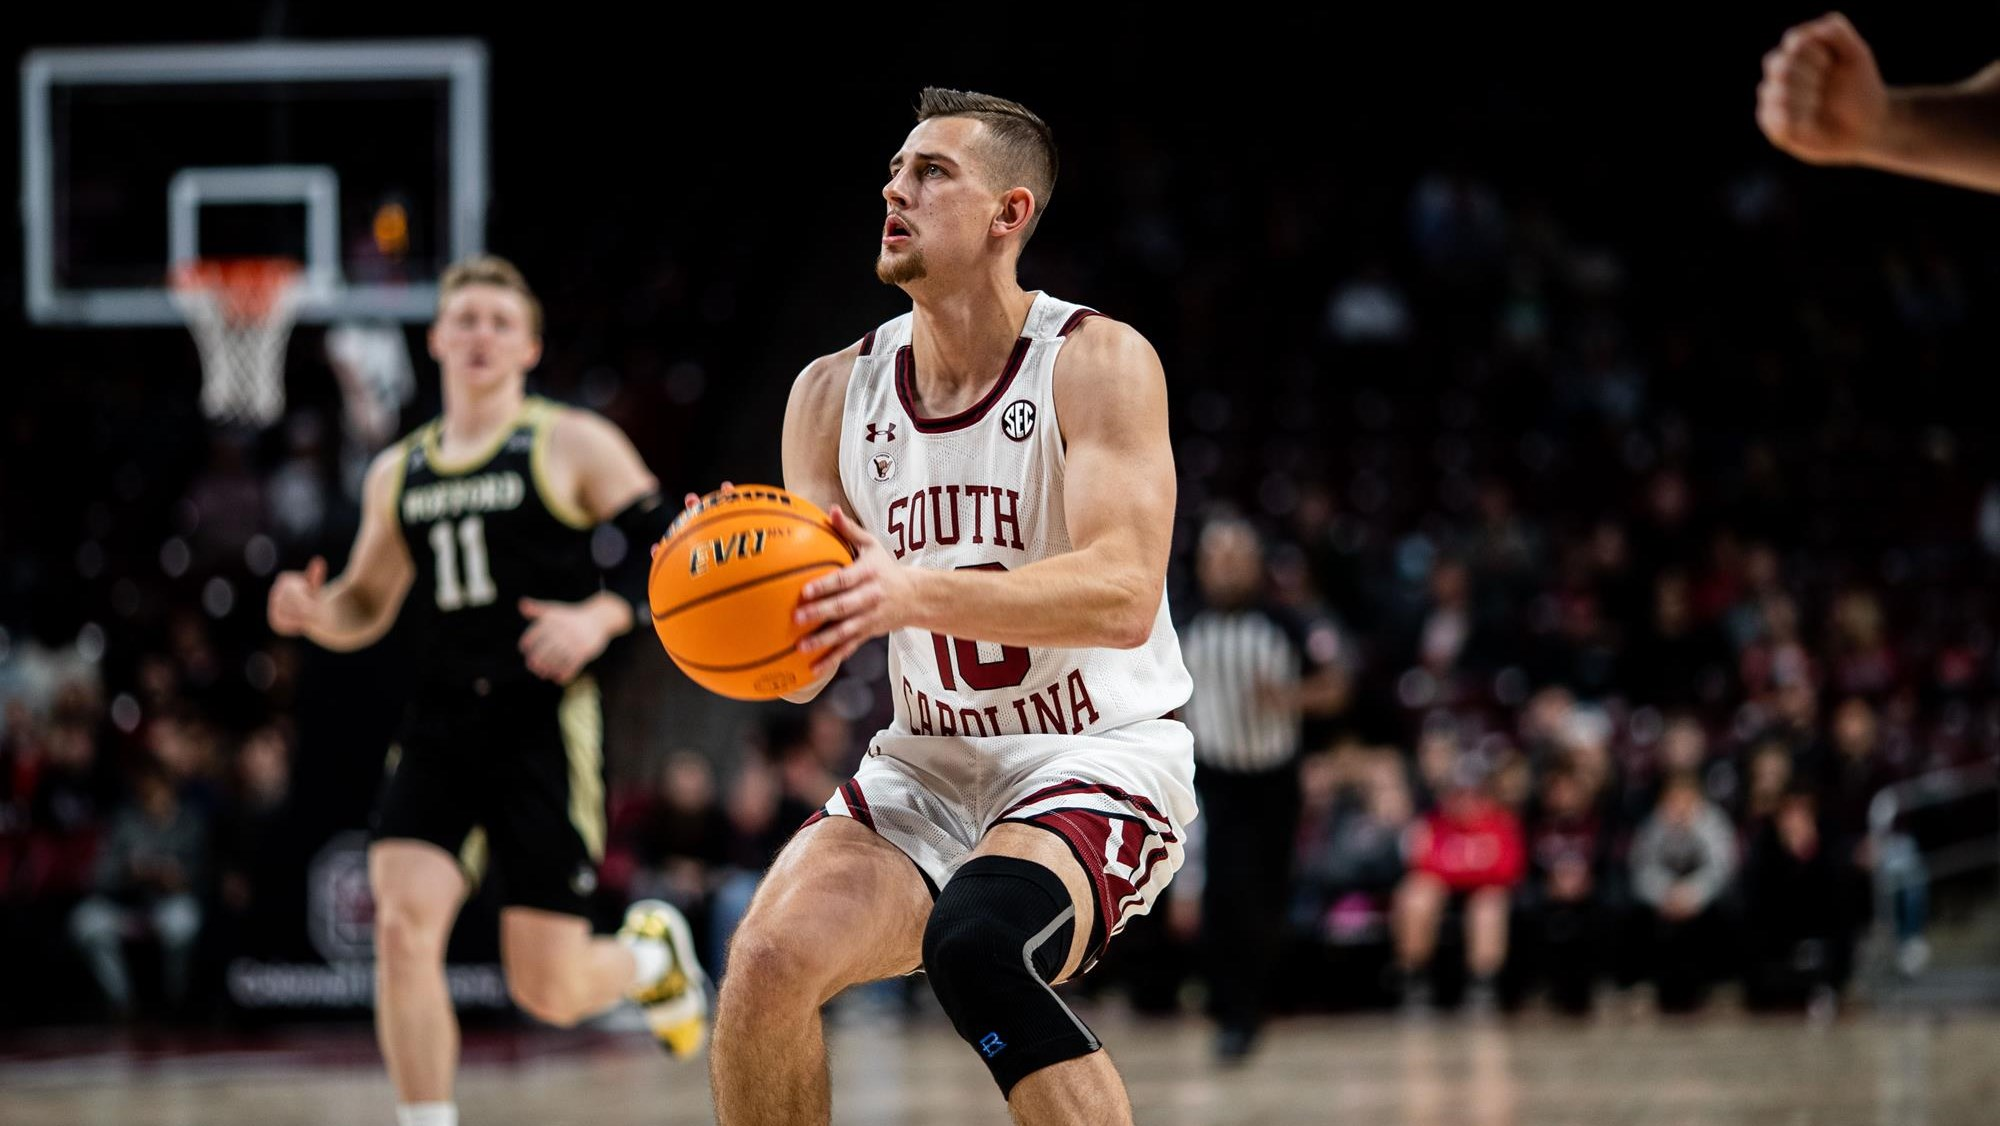 Stevenson guides South Carolina to 85-74 win over Wofford